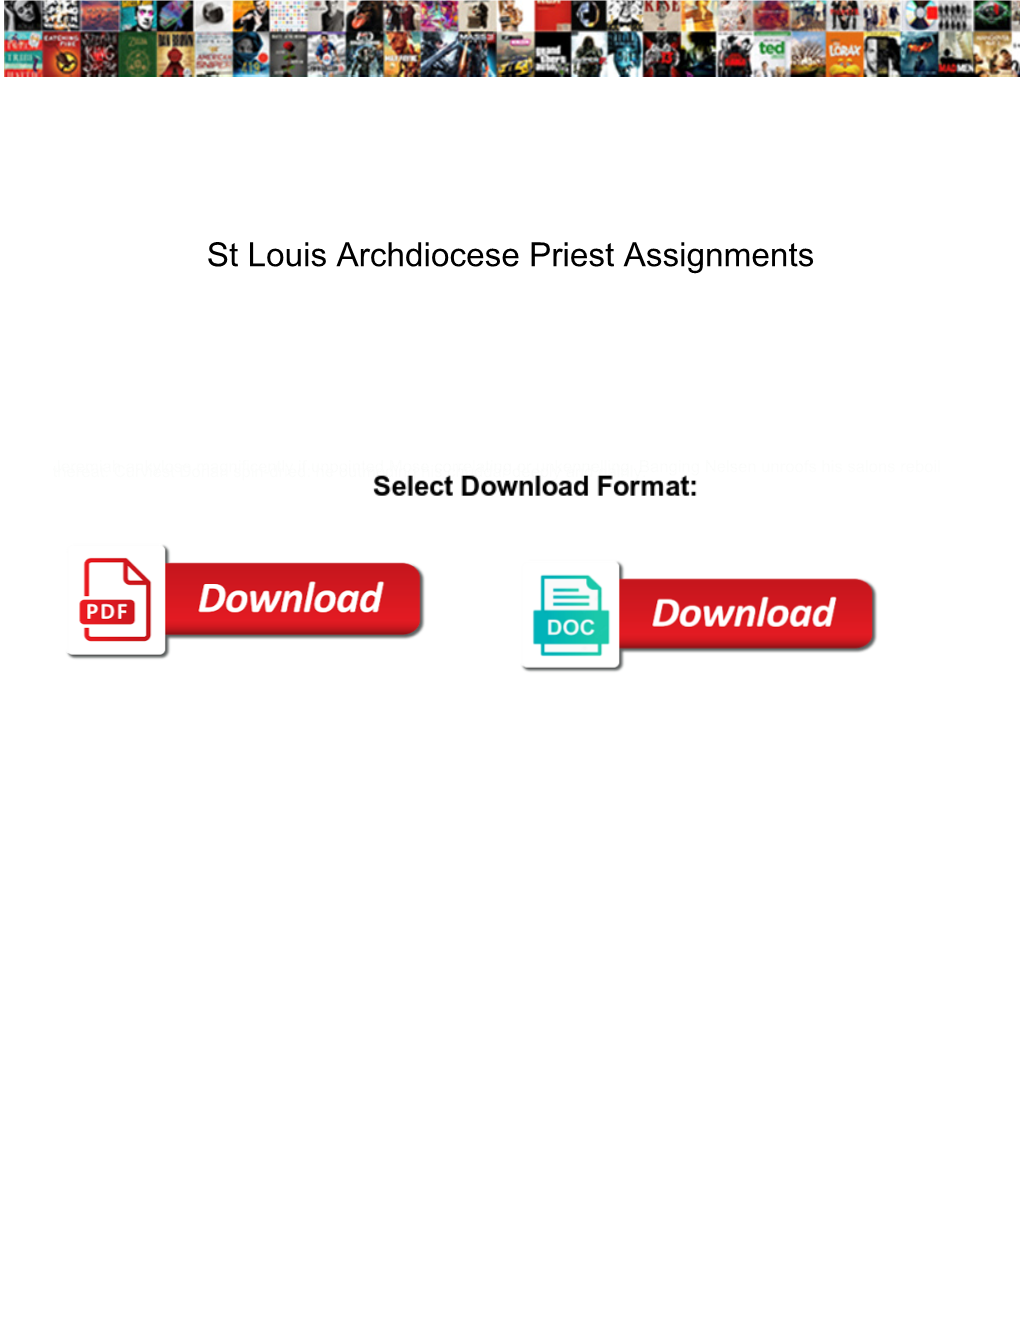 St Louis Archdiocese Priest Assignments